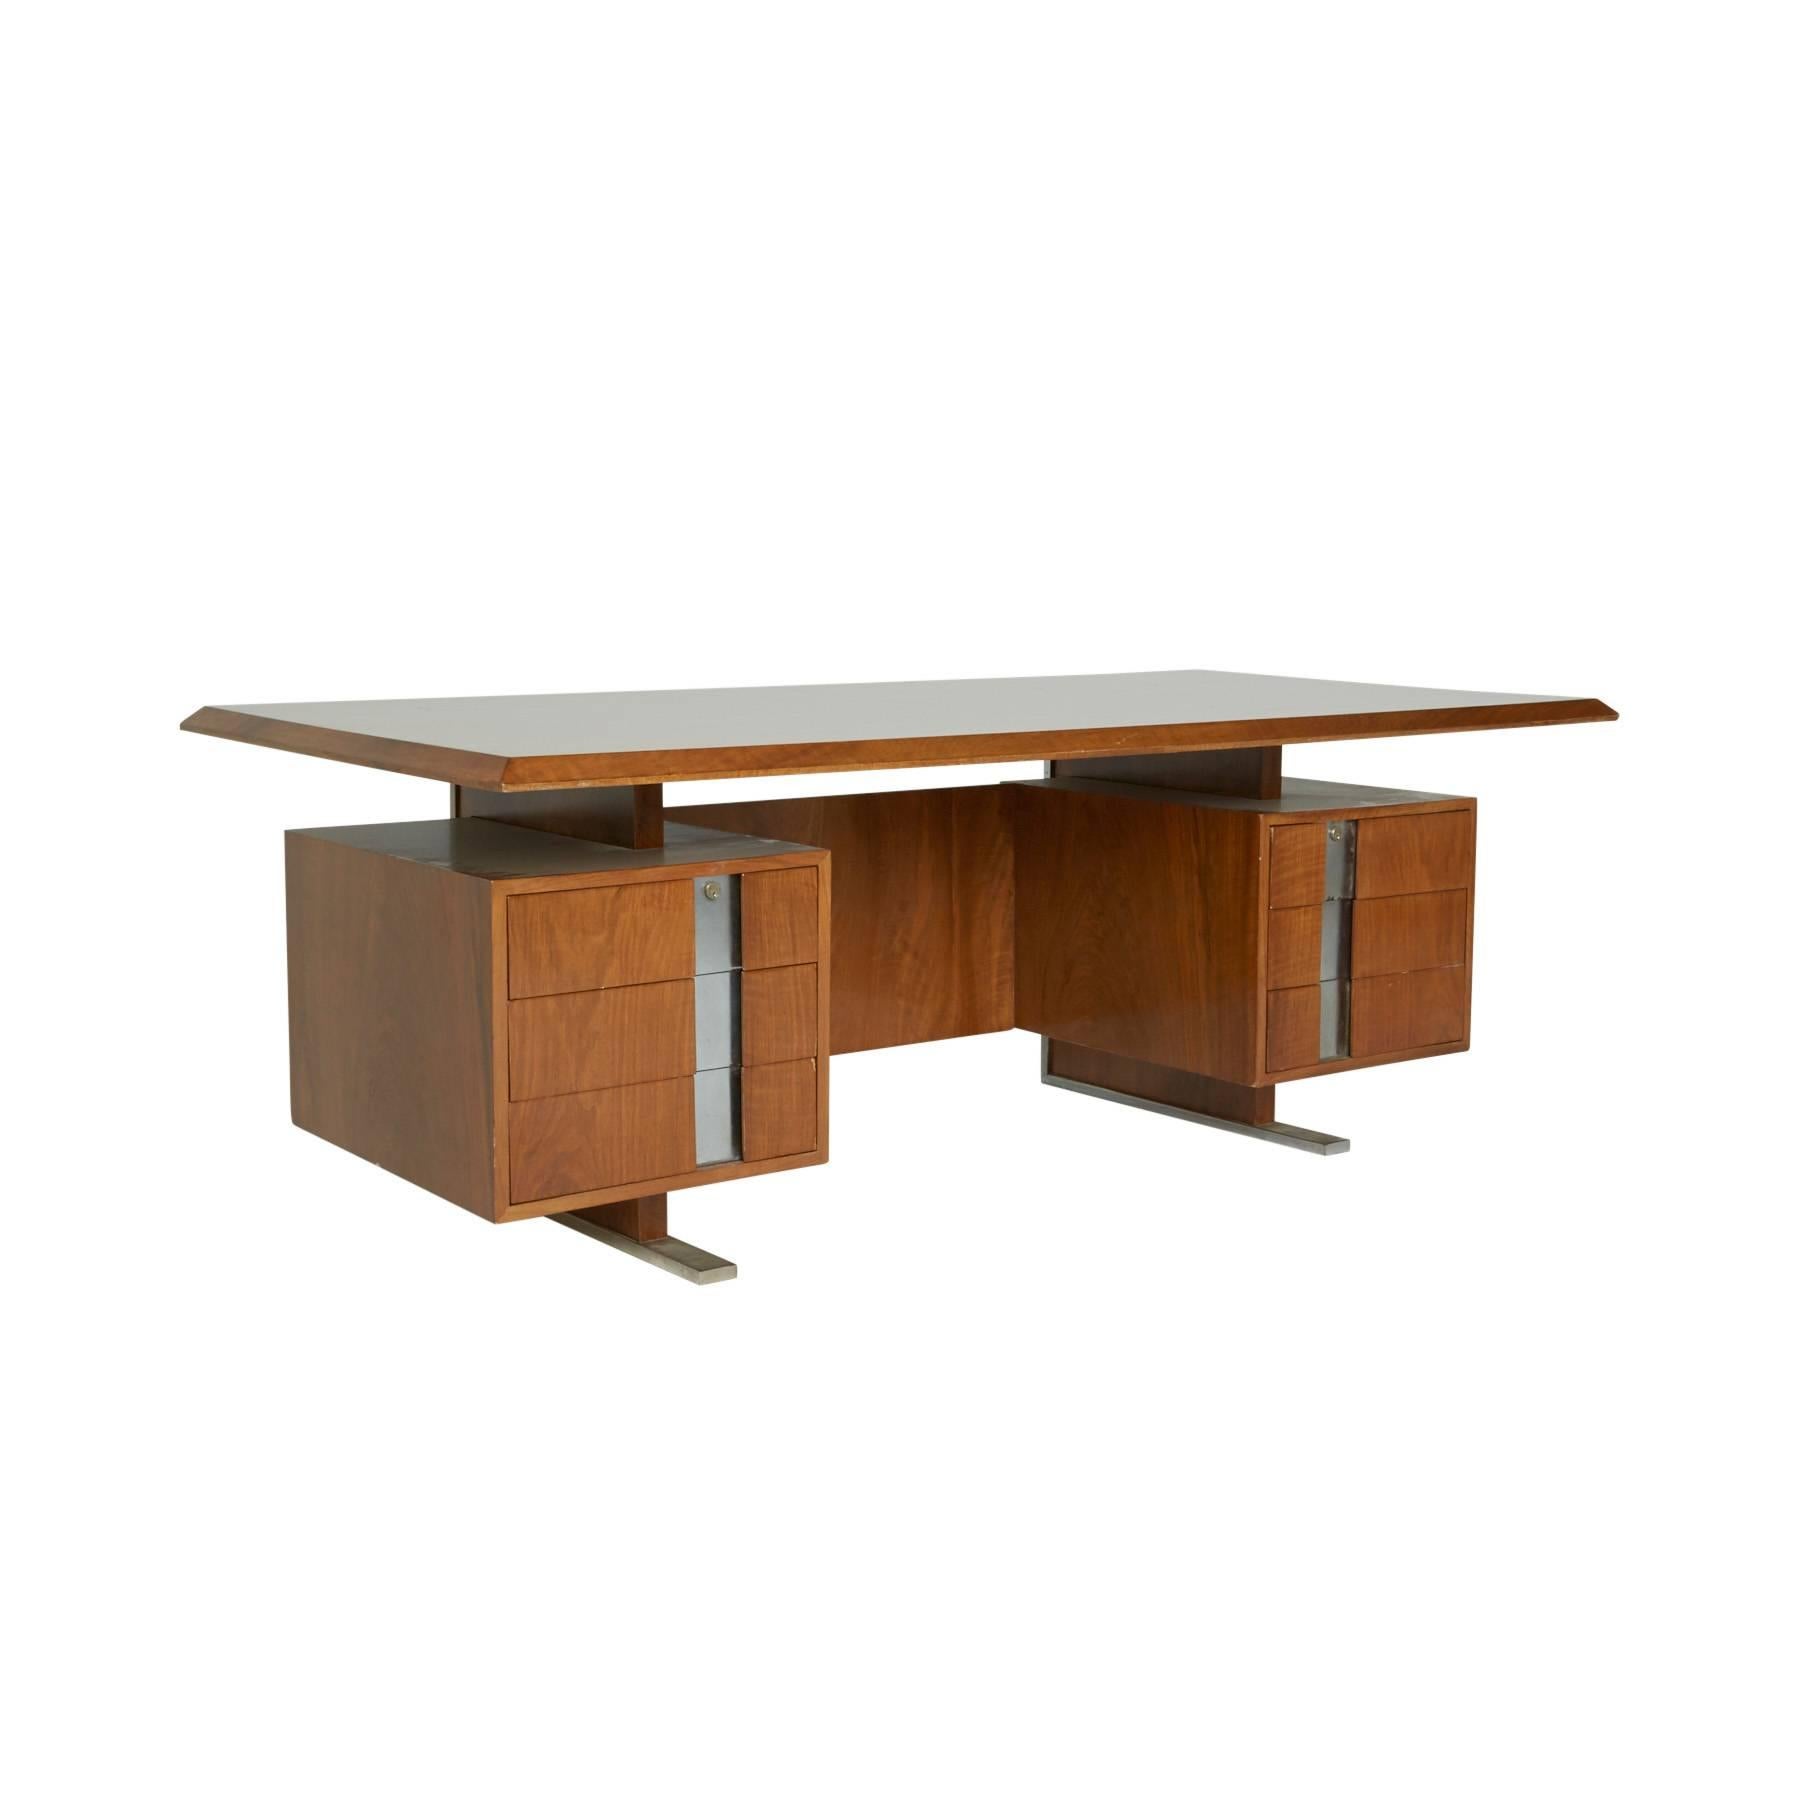 With its floating tabletop and mounted body, this modern executive desk attributed to Pace collection and similar in style to Warren Platner, is as bold and authoritative as it is aerial and fresh. Constructed with walnut and chrome, this desk